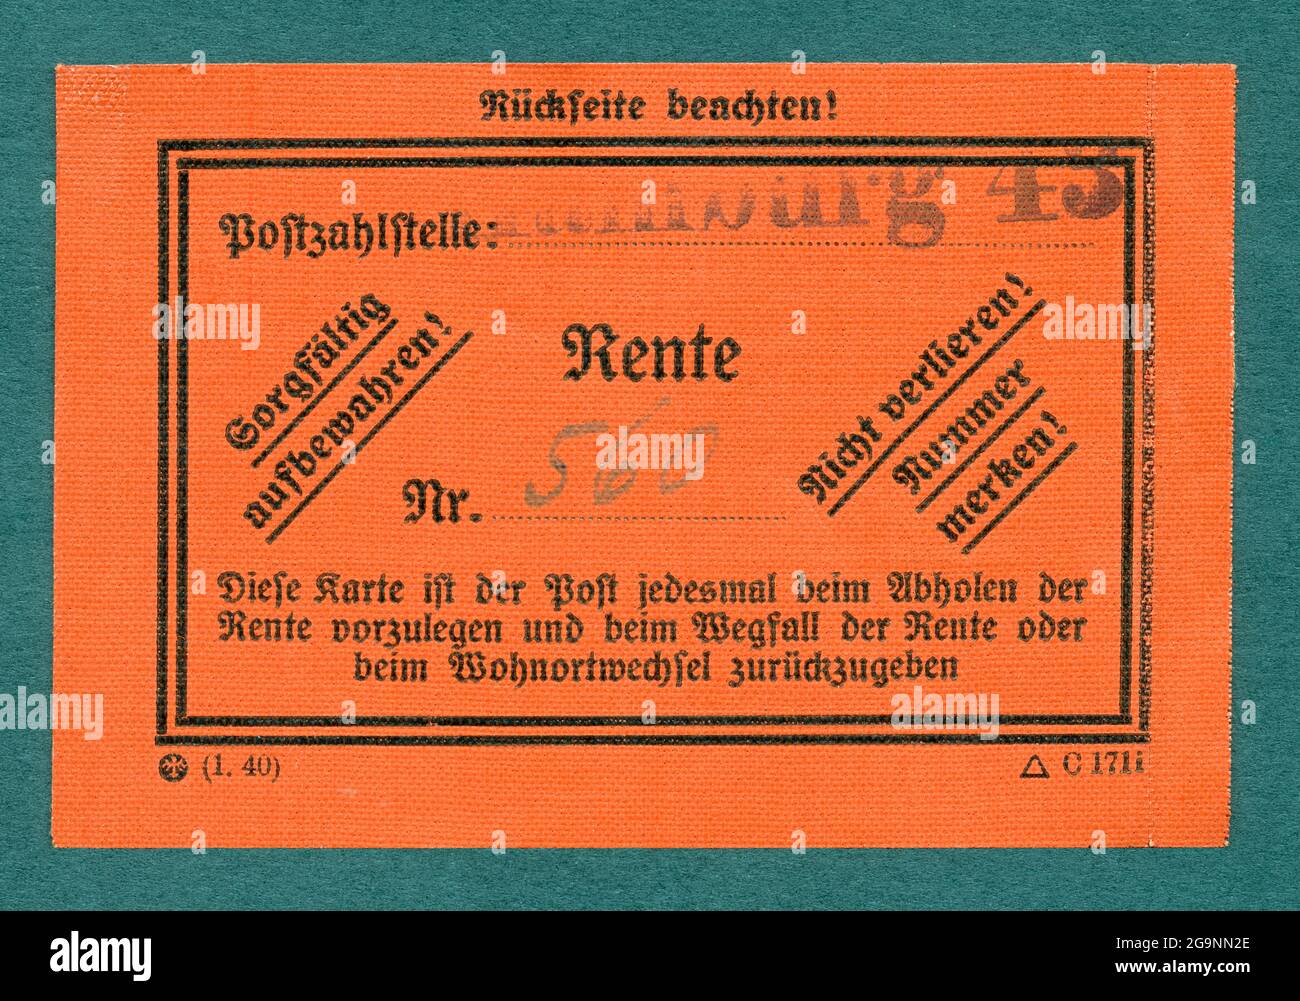 Third Reich, identification card for the pension, size 9 cm x 6 cm, Hamburg, around 1940, ADDITIONAL-RIGHTS-CLEARANCE-INFO-NOT-AVAILABLE Stock Photo